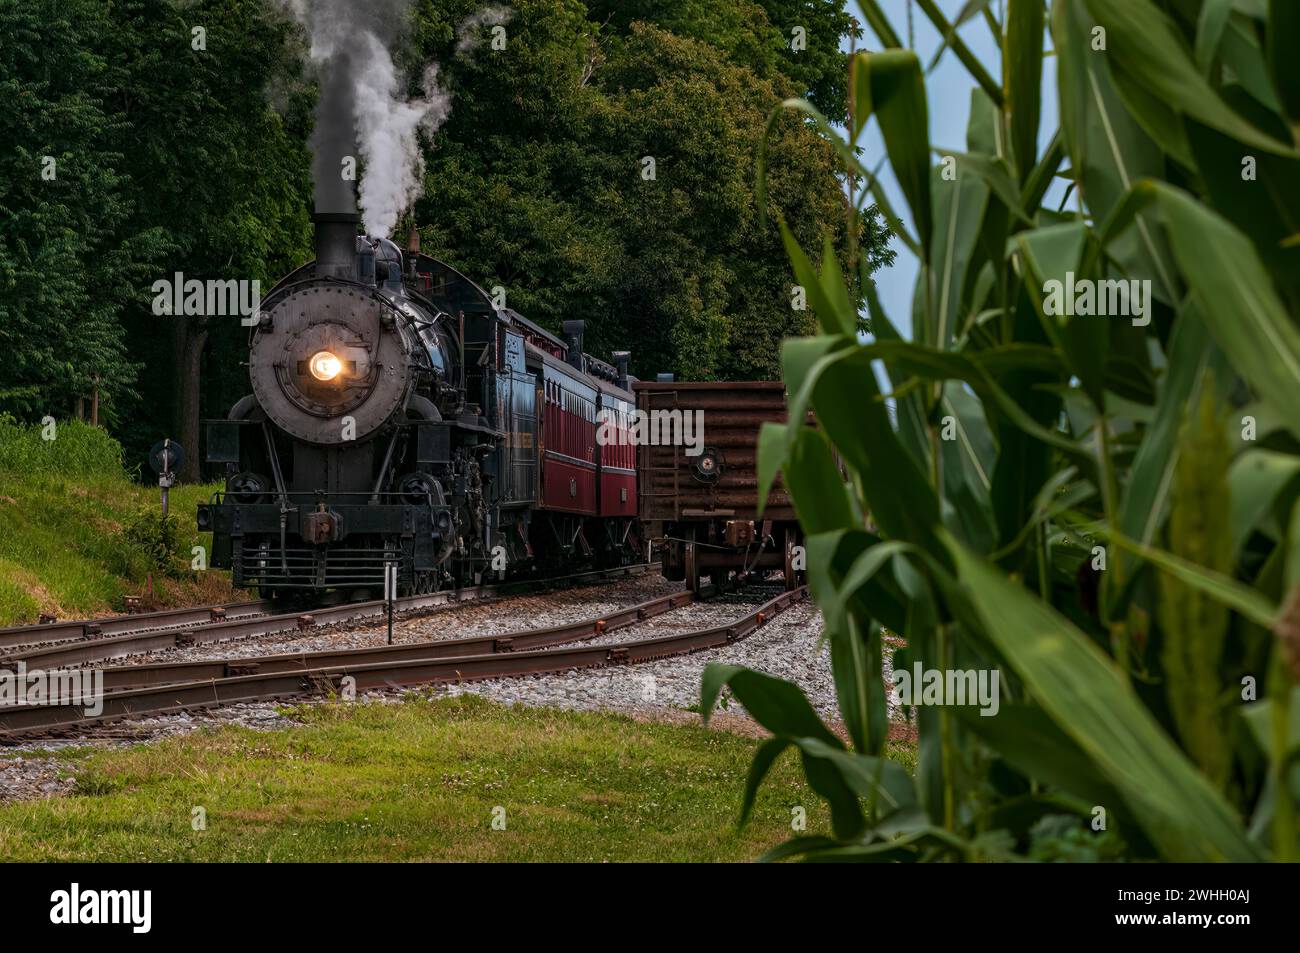 Front View of a Steam Locomotive Blowing Smoke and Steam With Freight and Corn Stalks on the Right Stock Photo